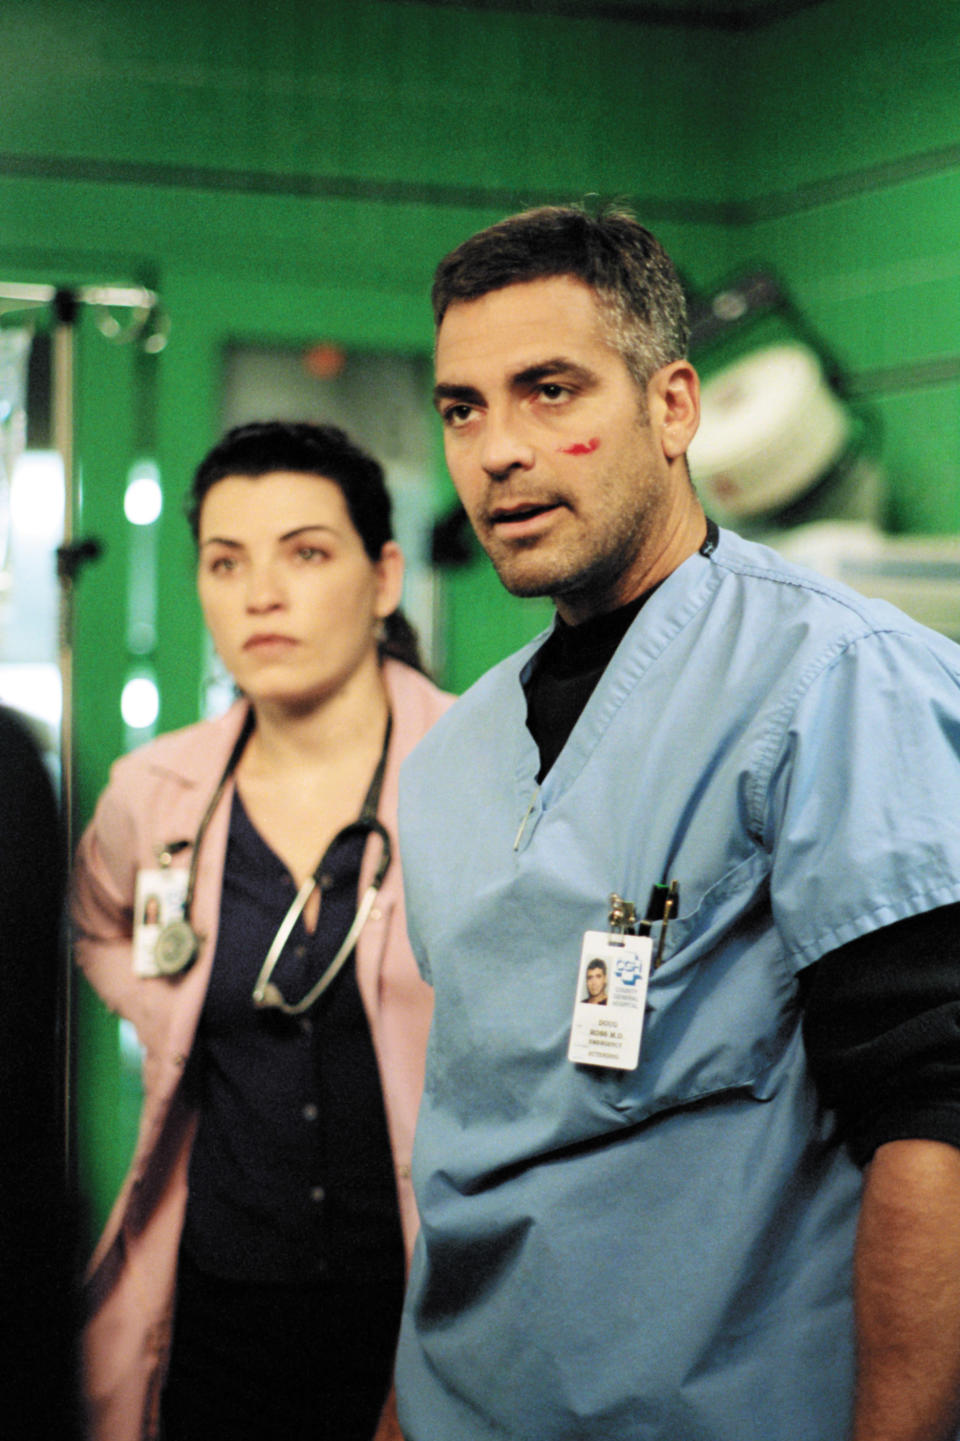 Julianna Margulies and George Clooney during an ER episode